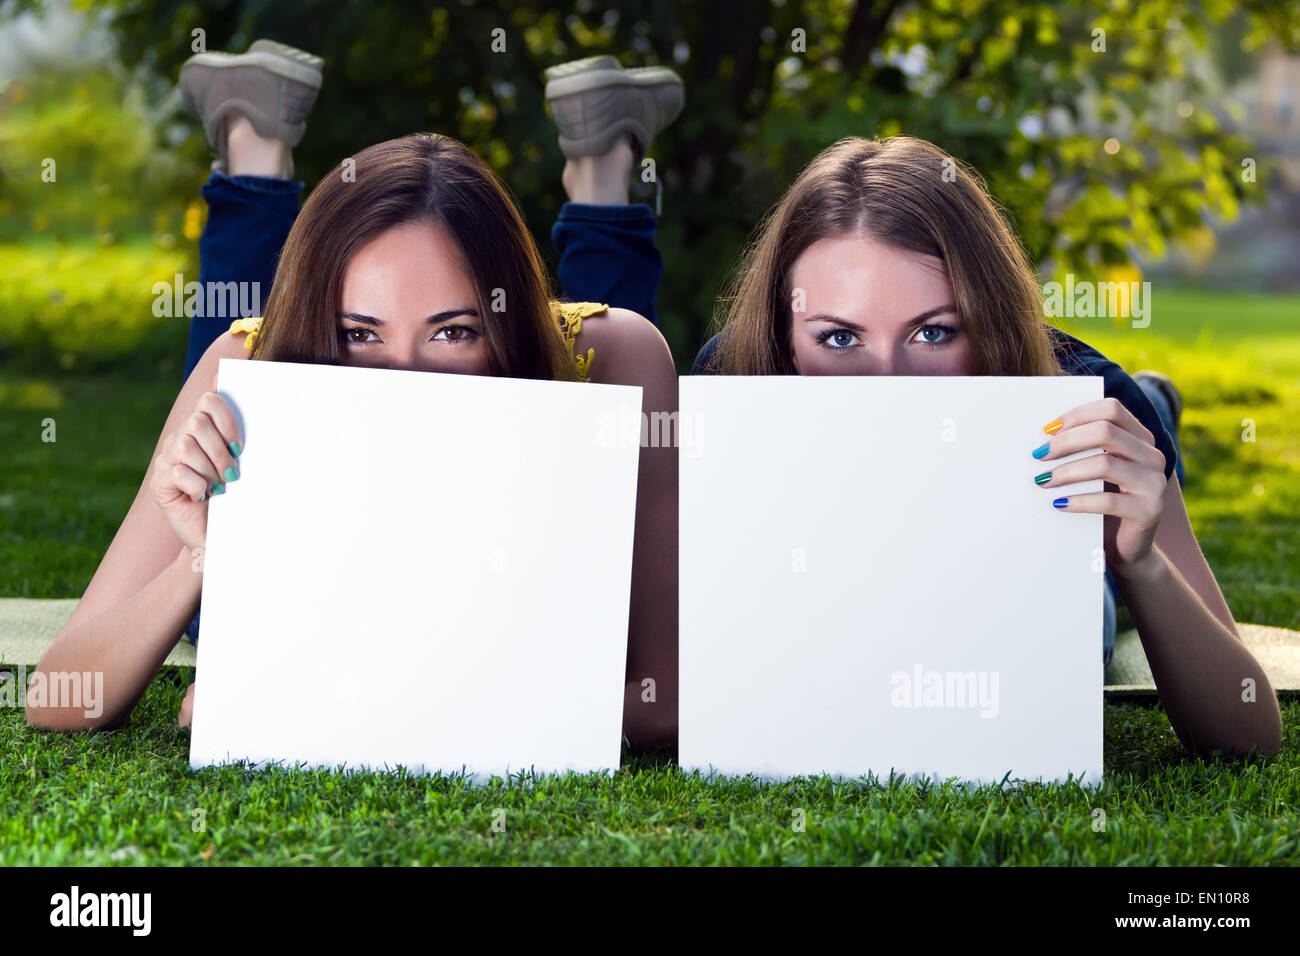 Happy young girls holding white blank papers against background Stock Photo